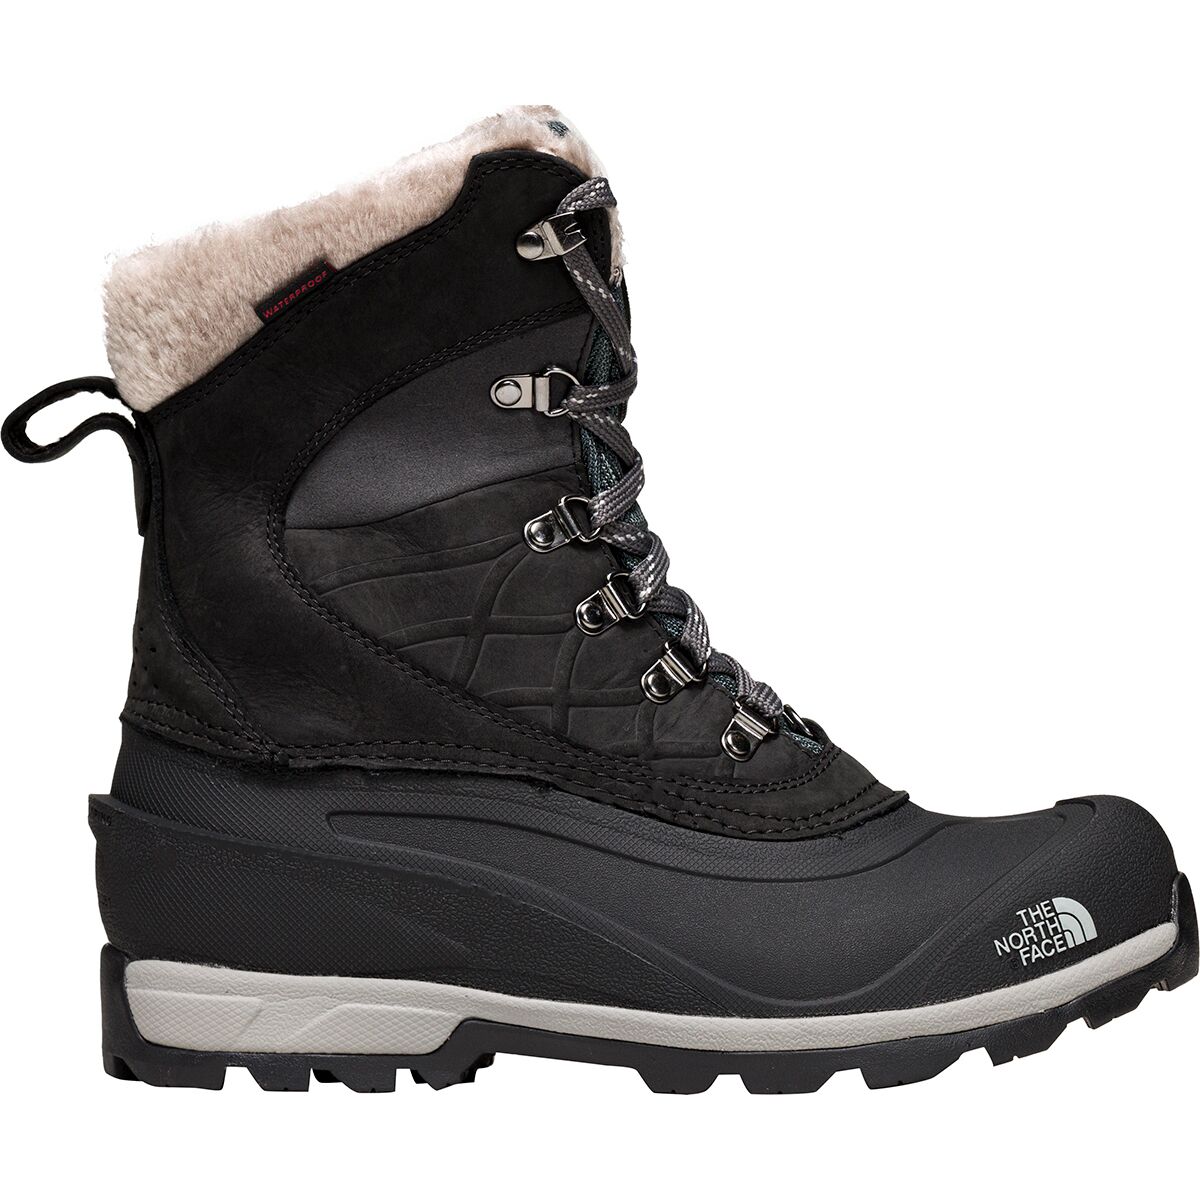 north face boots womens Off 76% - www.loverethymno.com